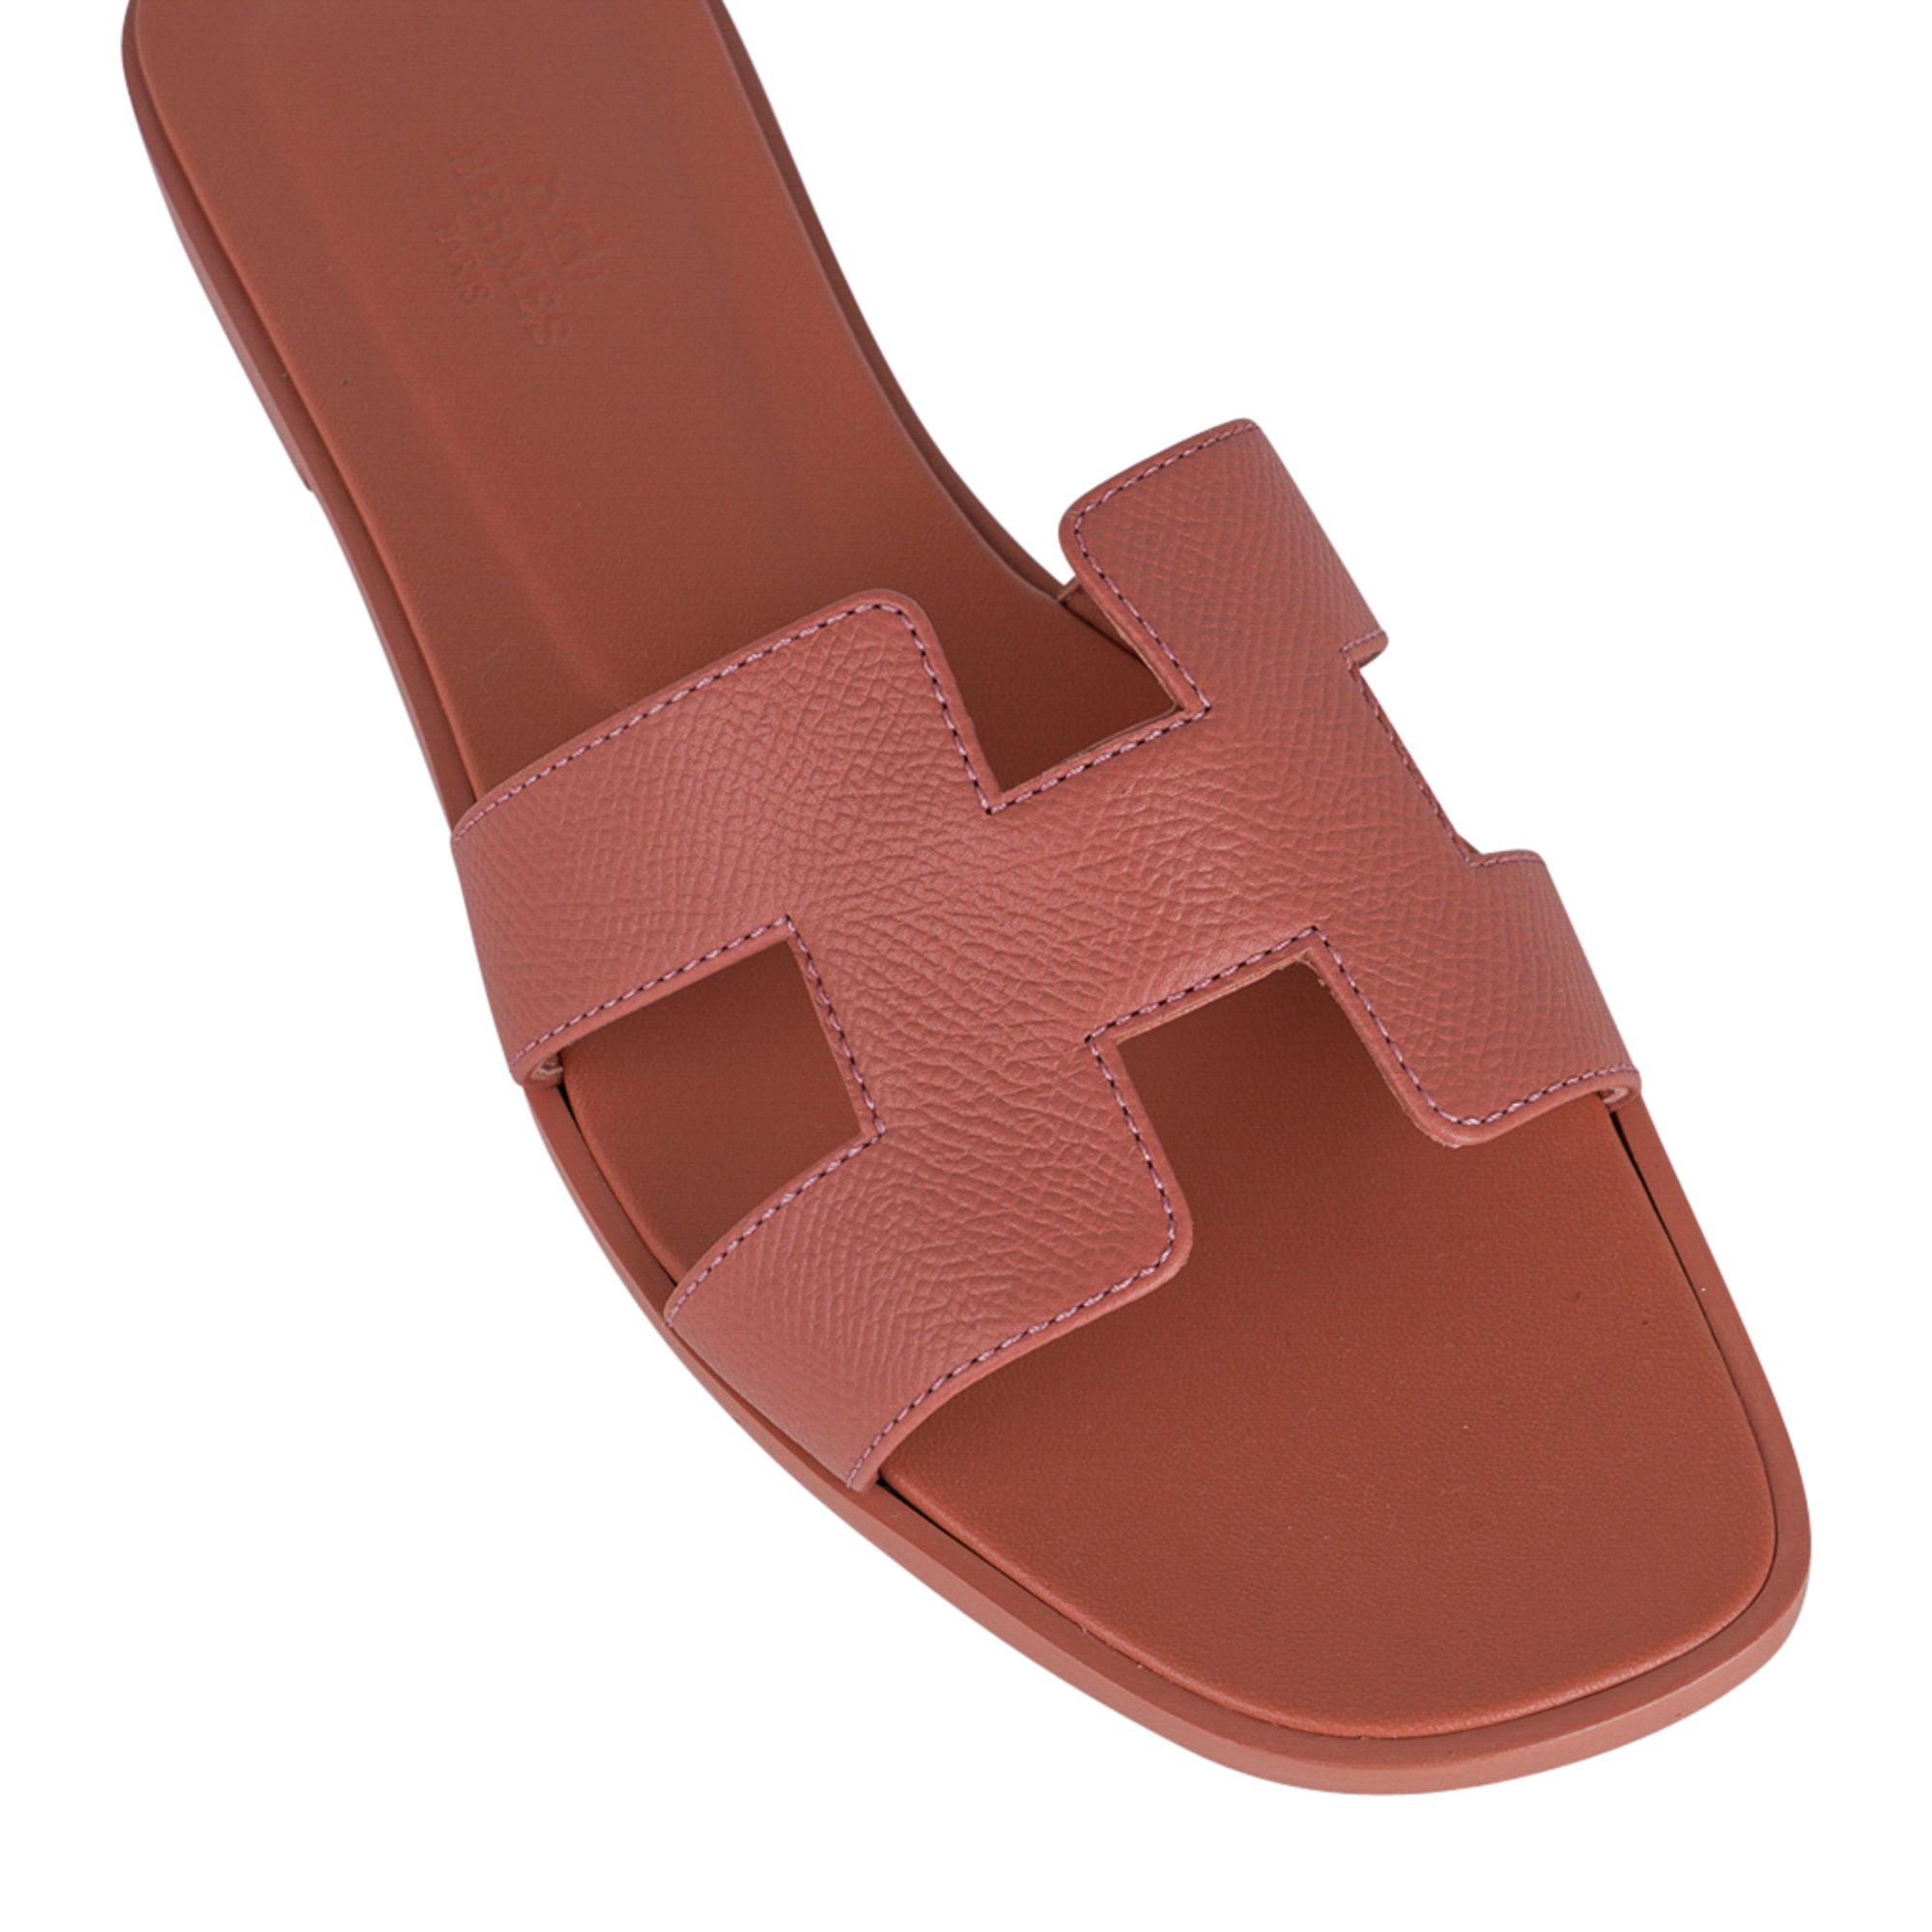 Mightychic offers a guaranteed authentic Hermes Oran Rose Aube sandals.
These soft duty pink flat slides are a must for foot flirting!
The iconic top stitched H cutout over the top of the foot in Epsom leather.
Hermes Paris embossed Rose Aube